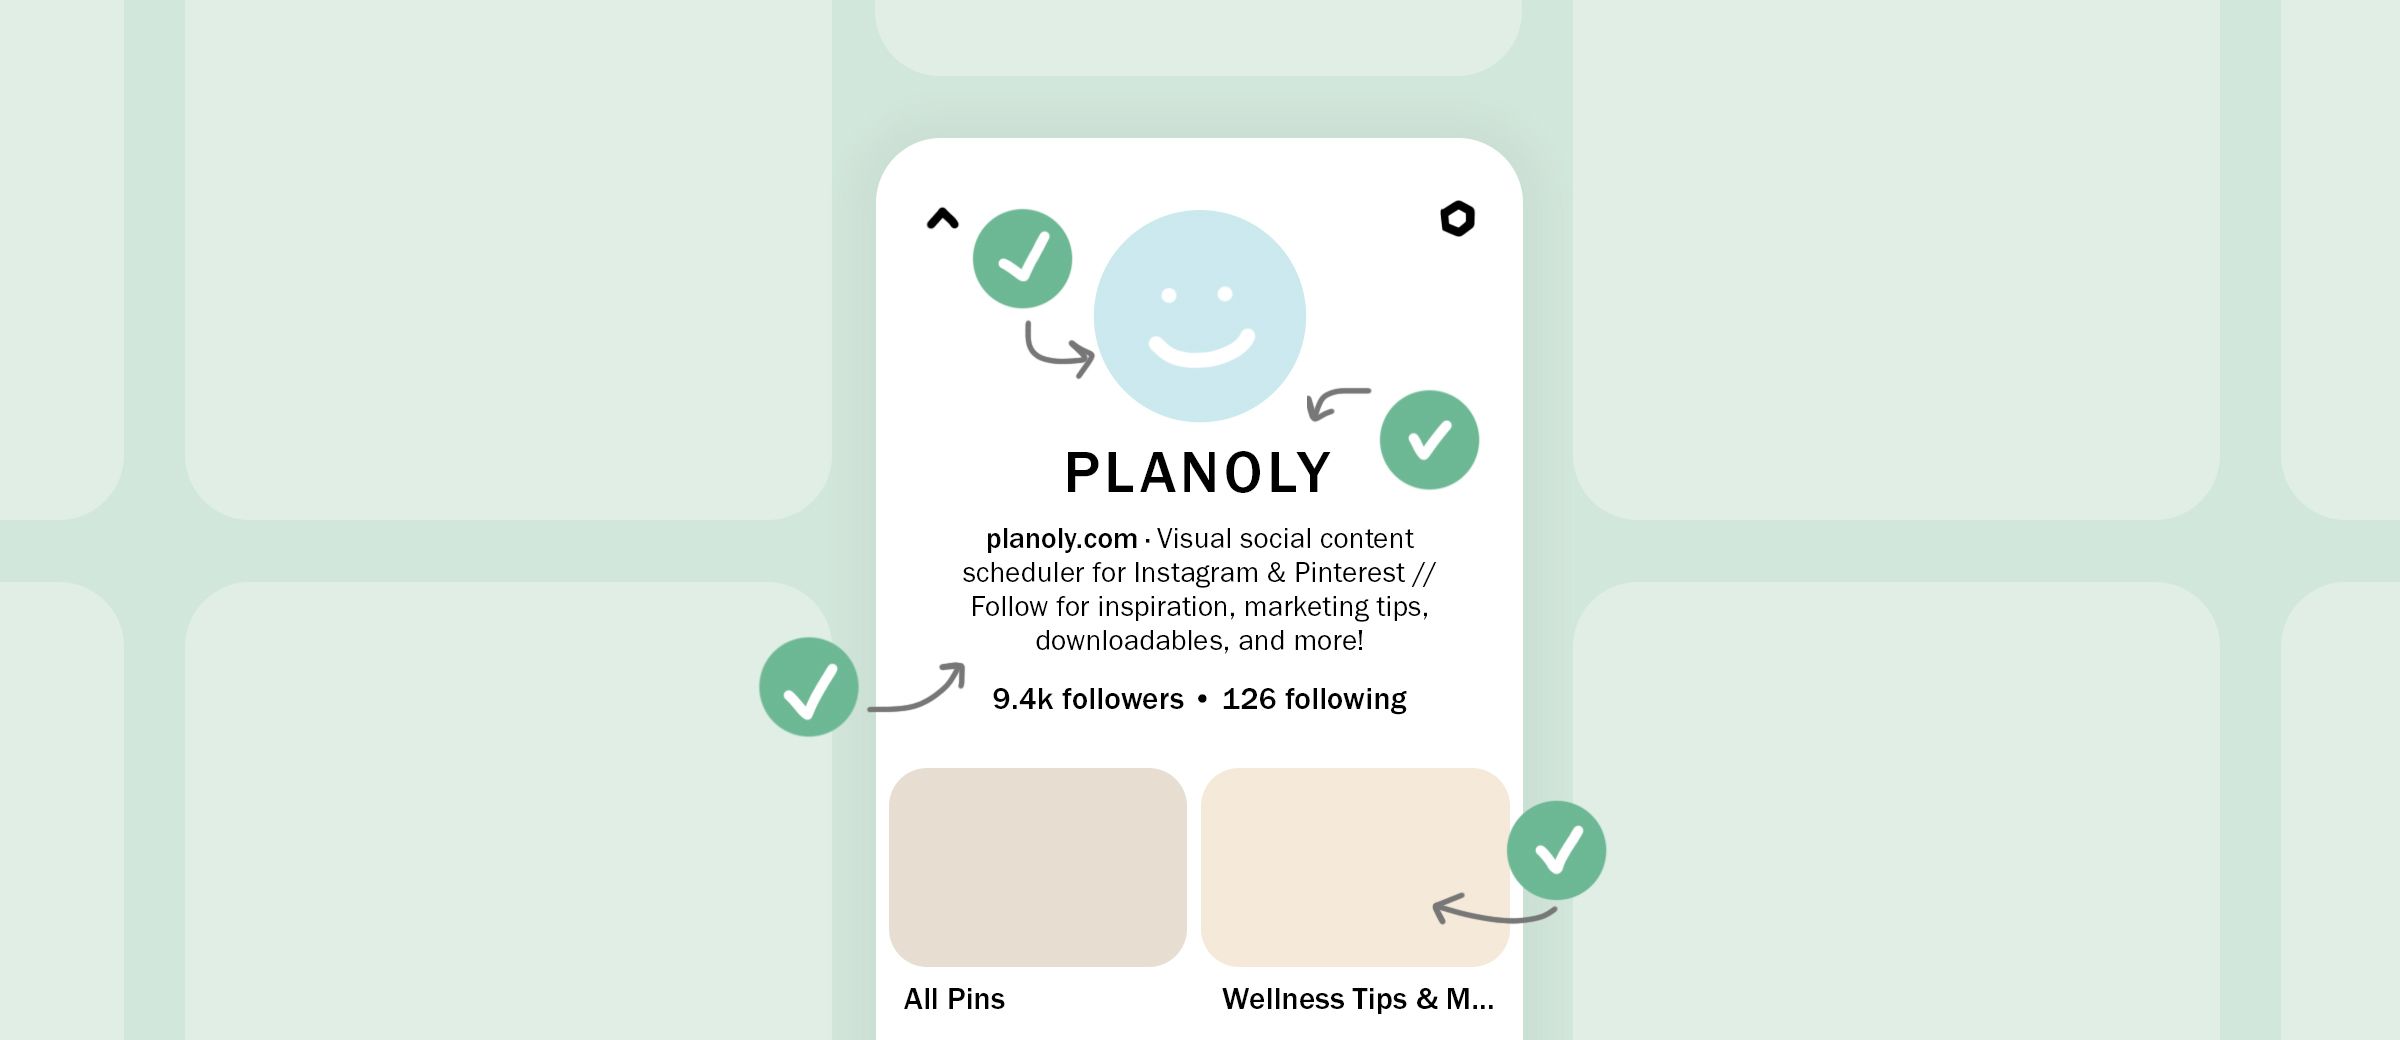 Read about How to Optimize Your Pinterest Profile & Grow Your Audience, on PLANOLY